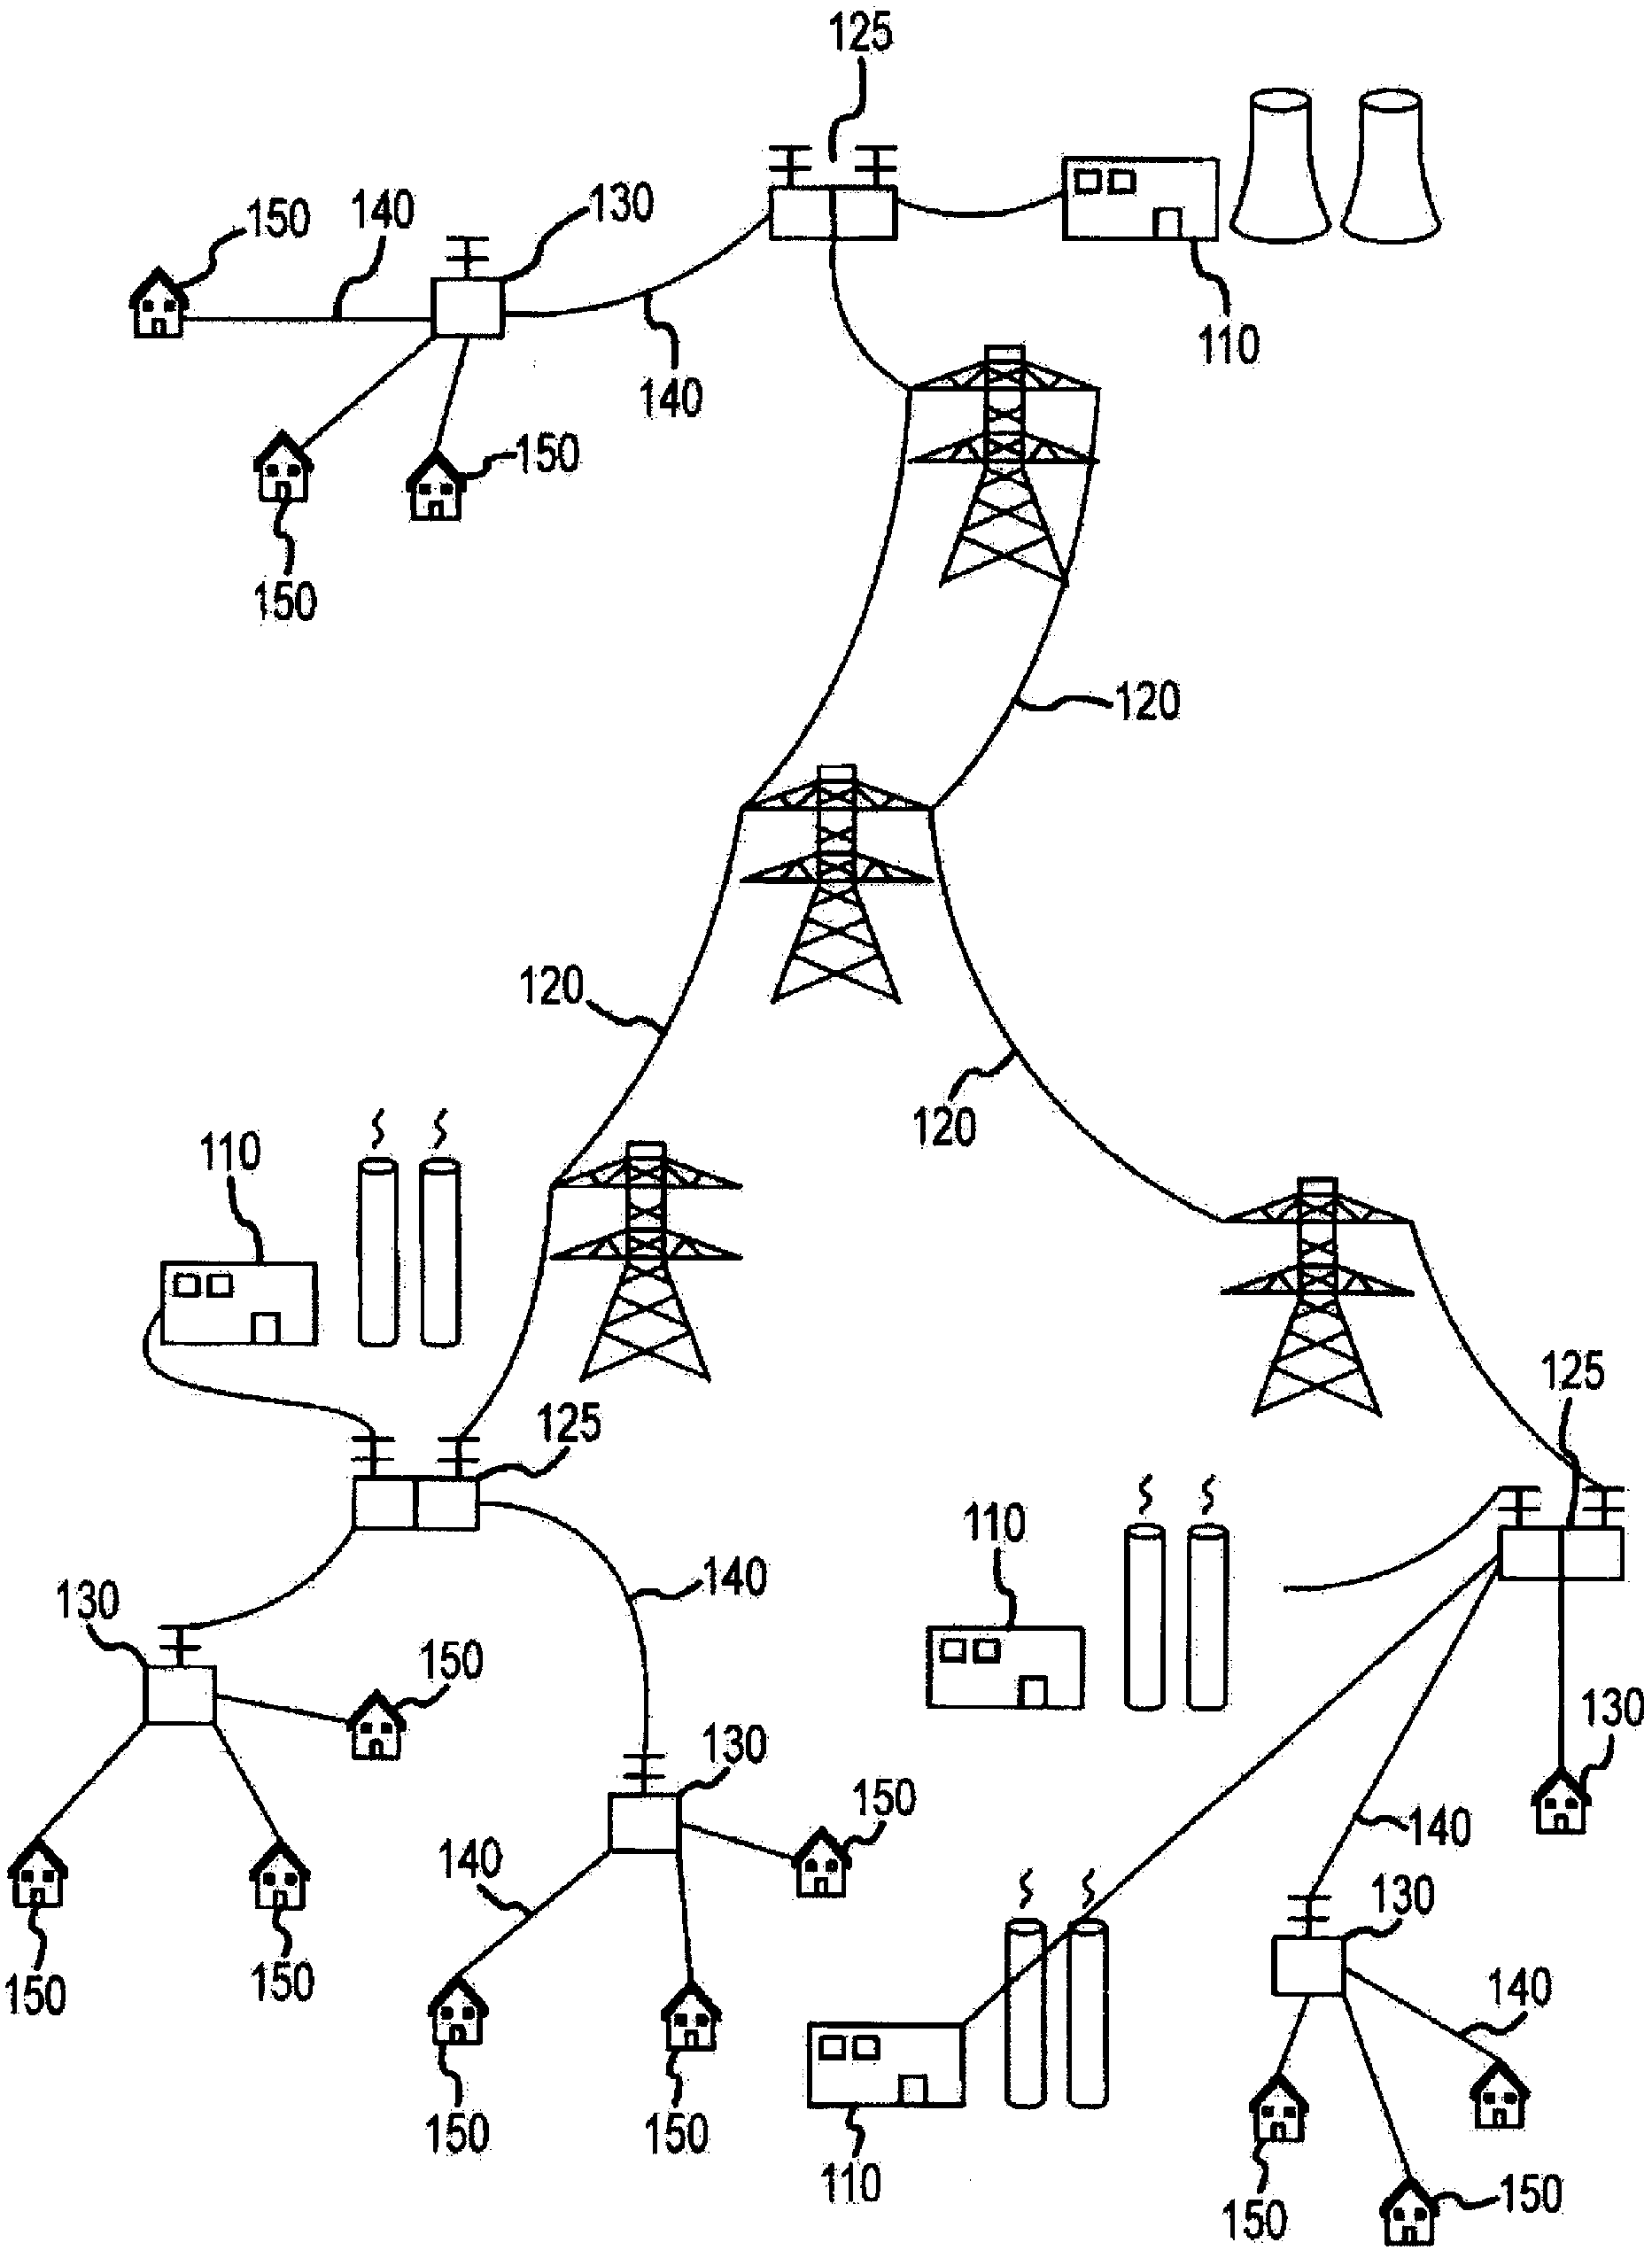 Dynamic distributed power grid control system